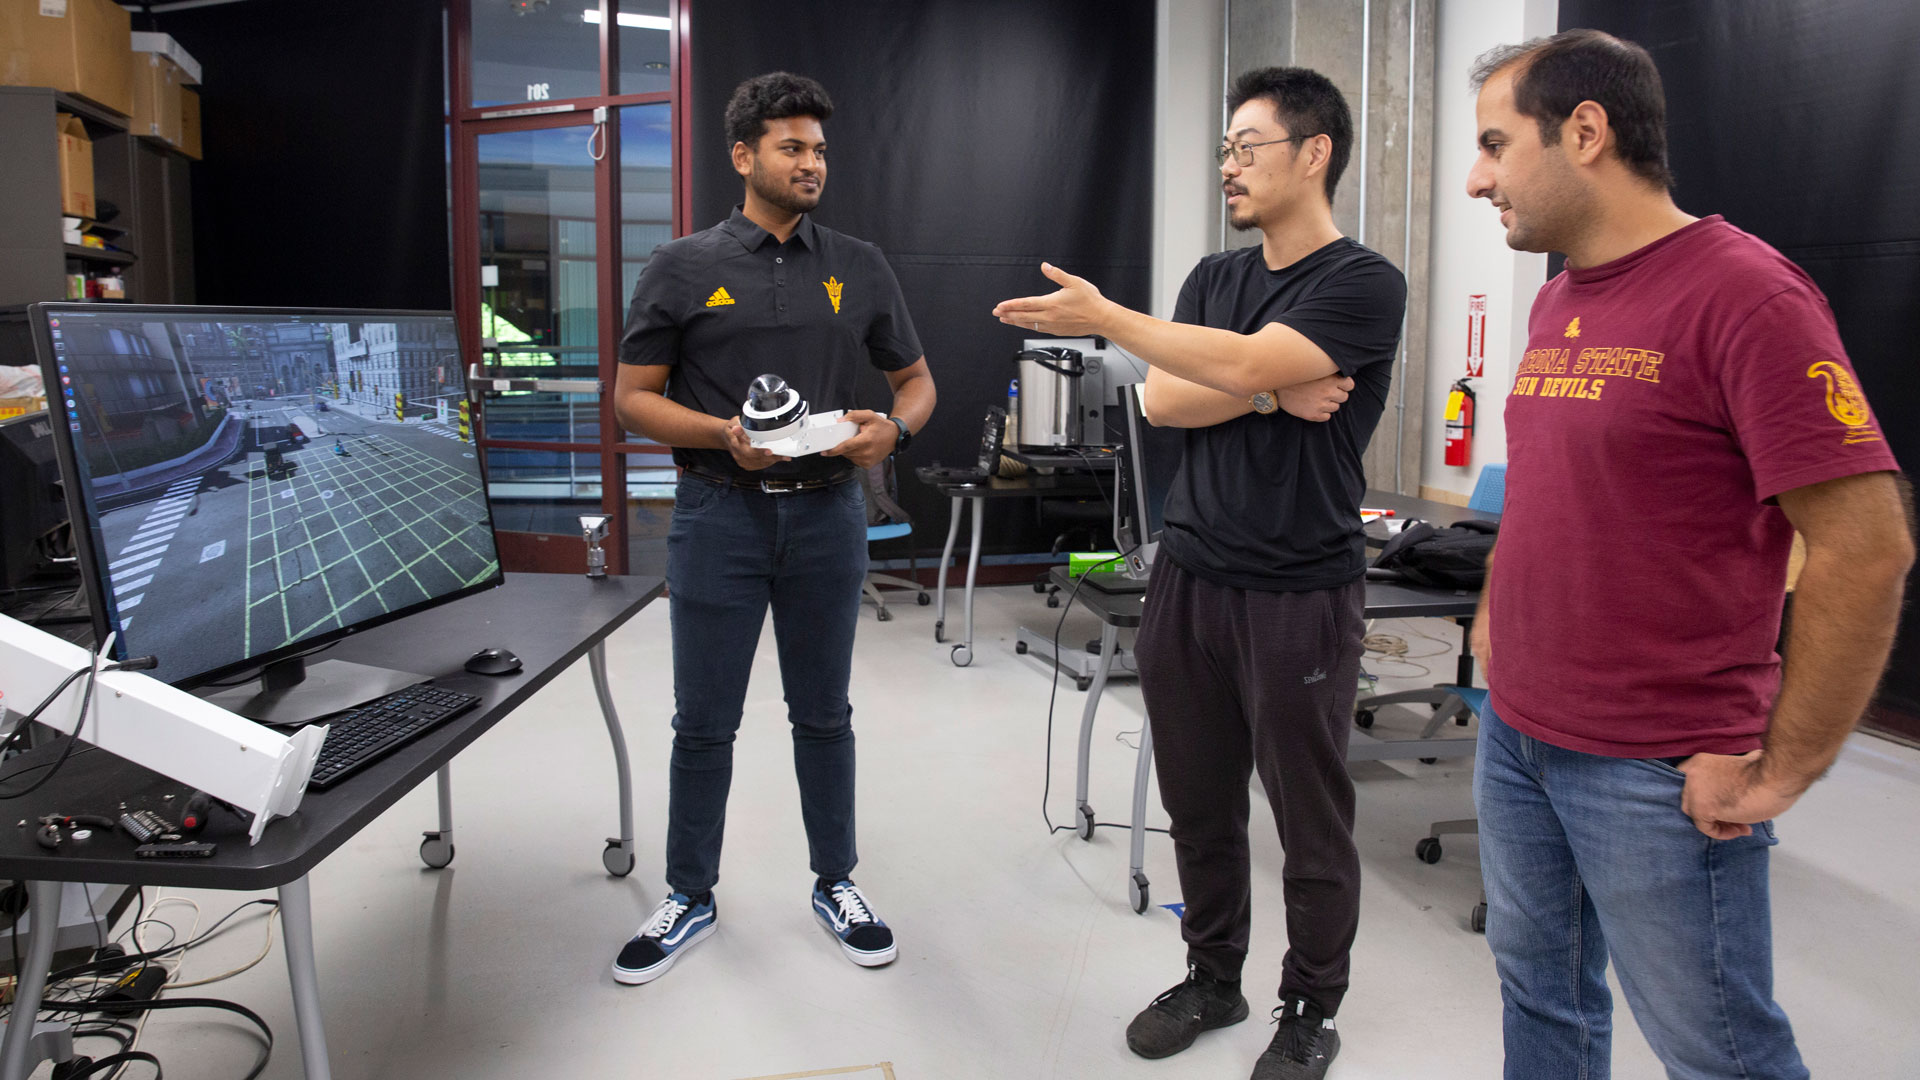 Robotics and autonomous systems graduate student Manthan Chelenahalli Satish is using traffic cameras and computer vision to estimate vehicle speed with Associate Professor Yezhou Yang and Mohammad Farhadi as part of MORE research in the Ira A. Fulton Schools of Engineering at ASU.